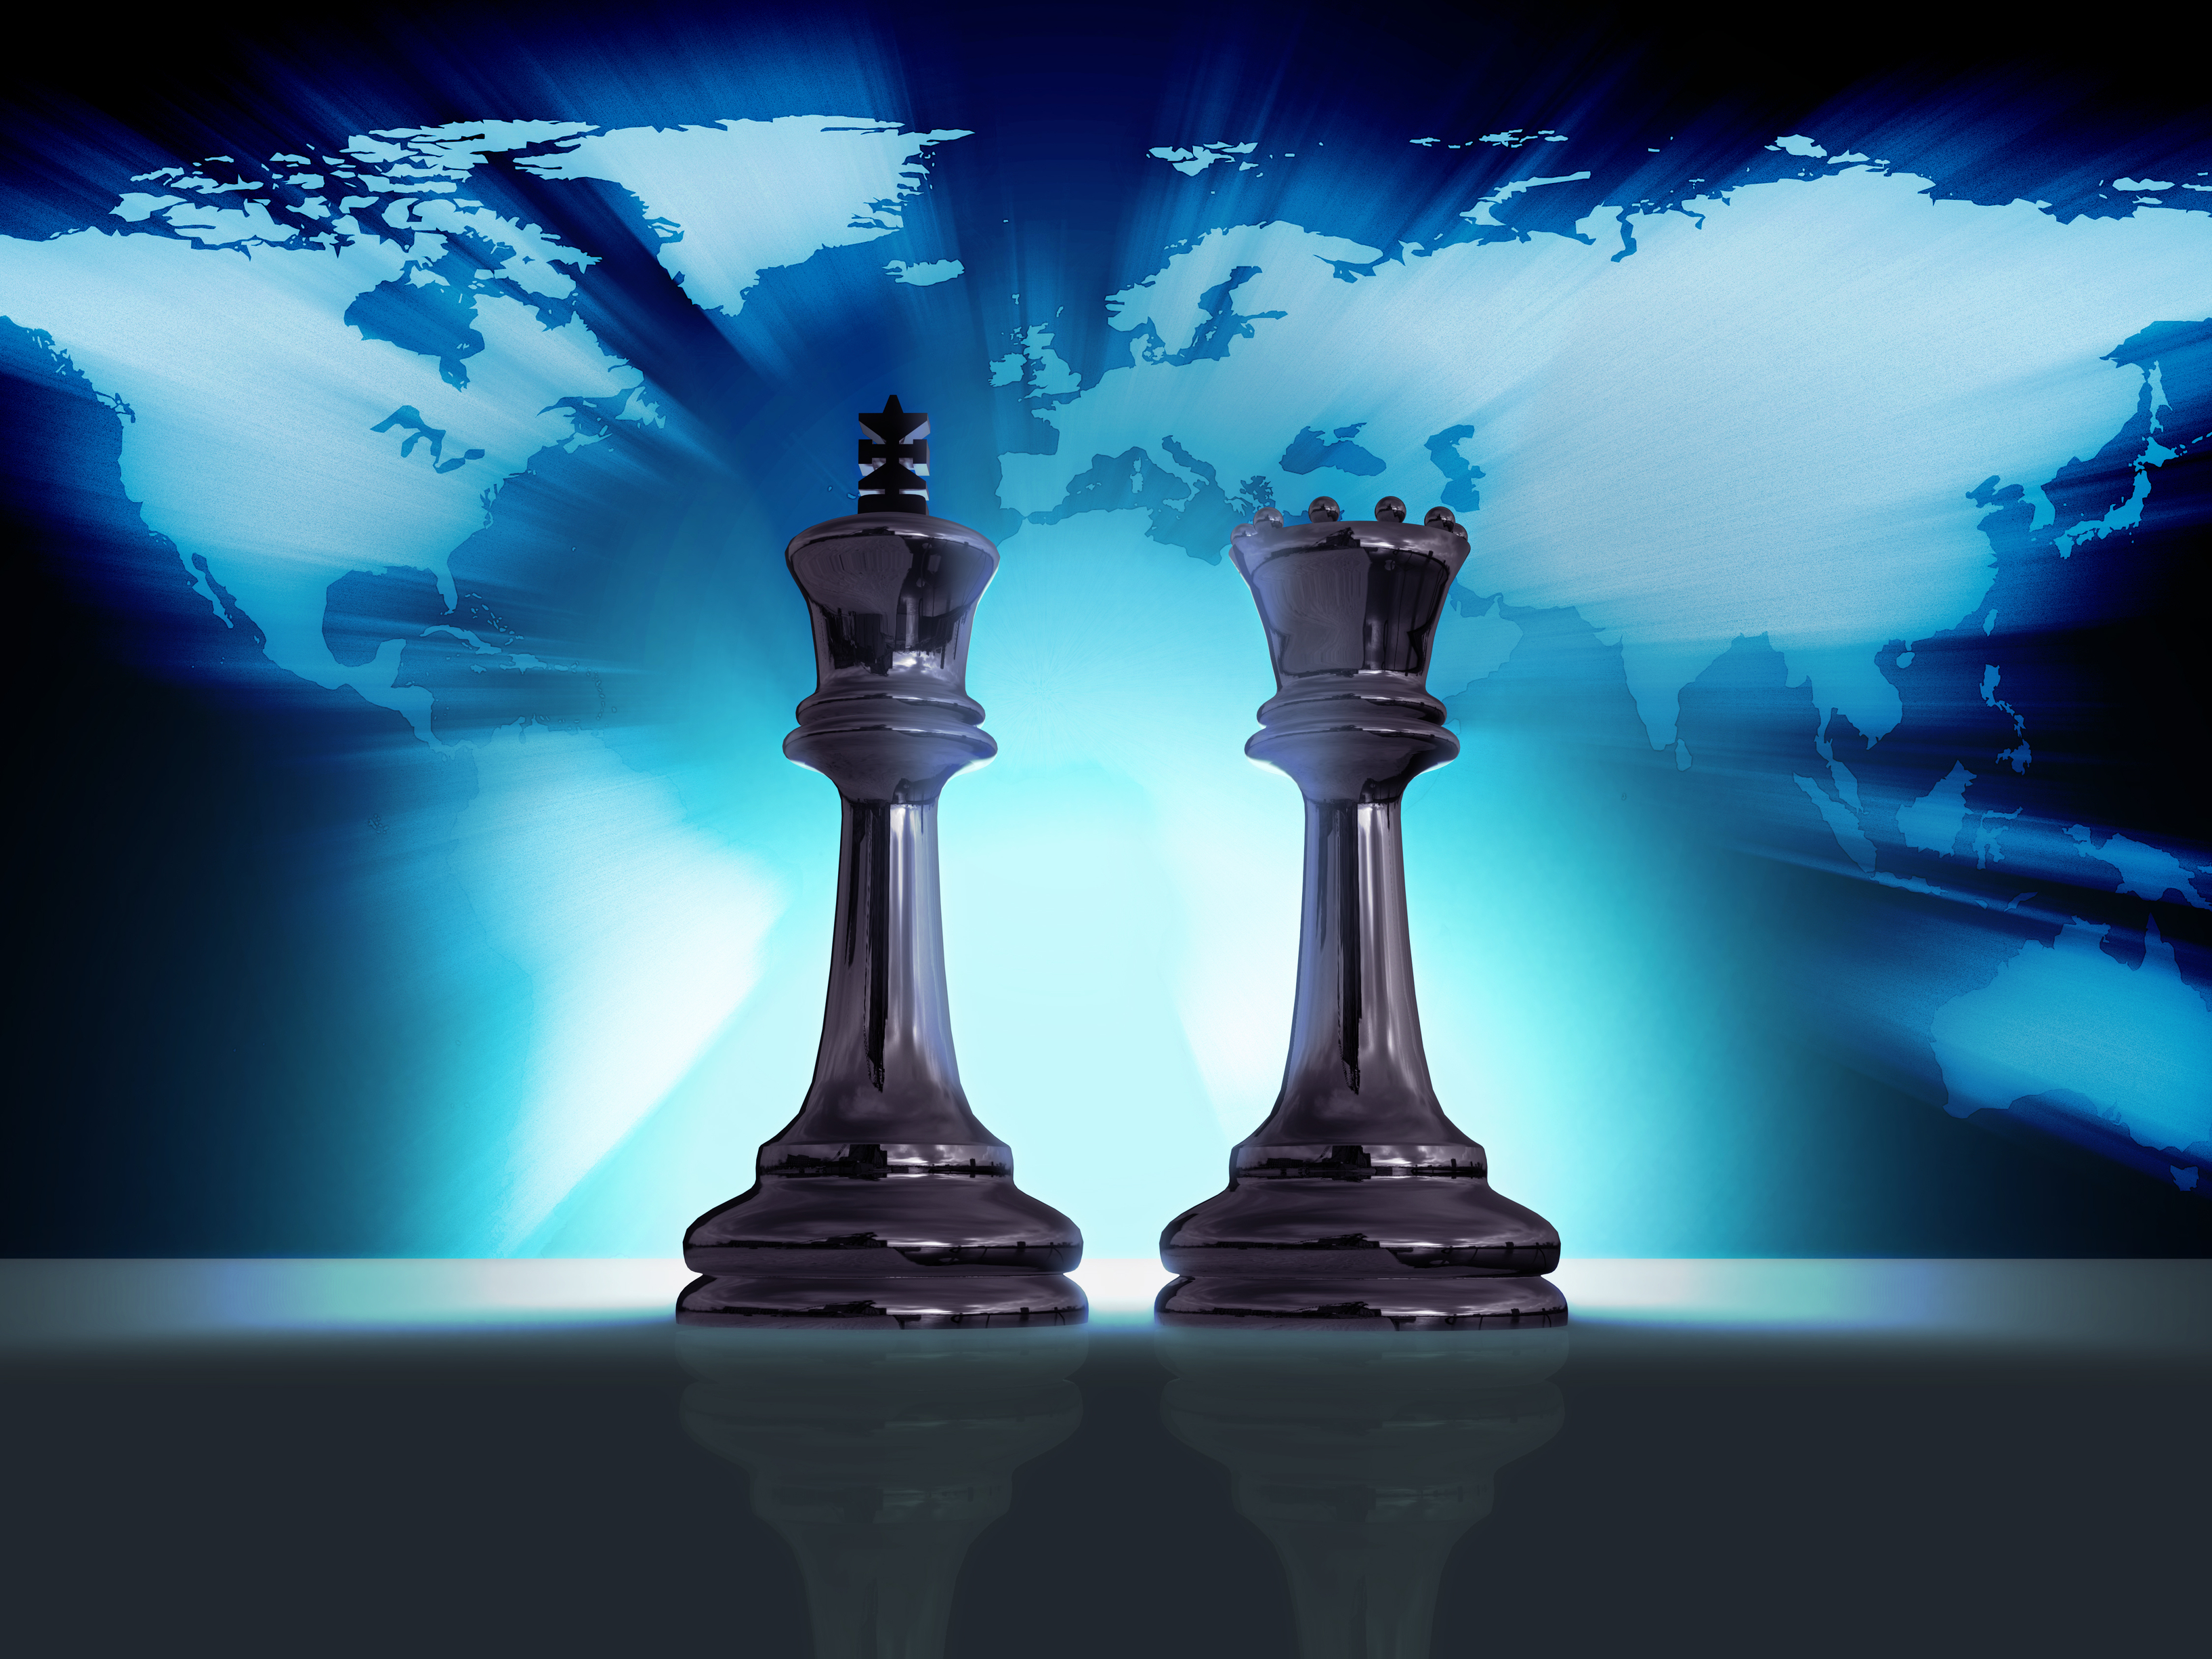 emperor-chapter-4-chess-piecesdreamstime_xl_651730